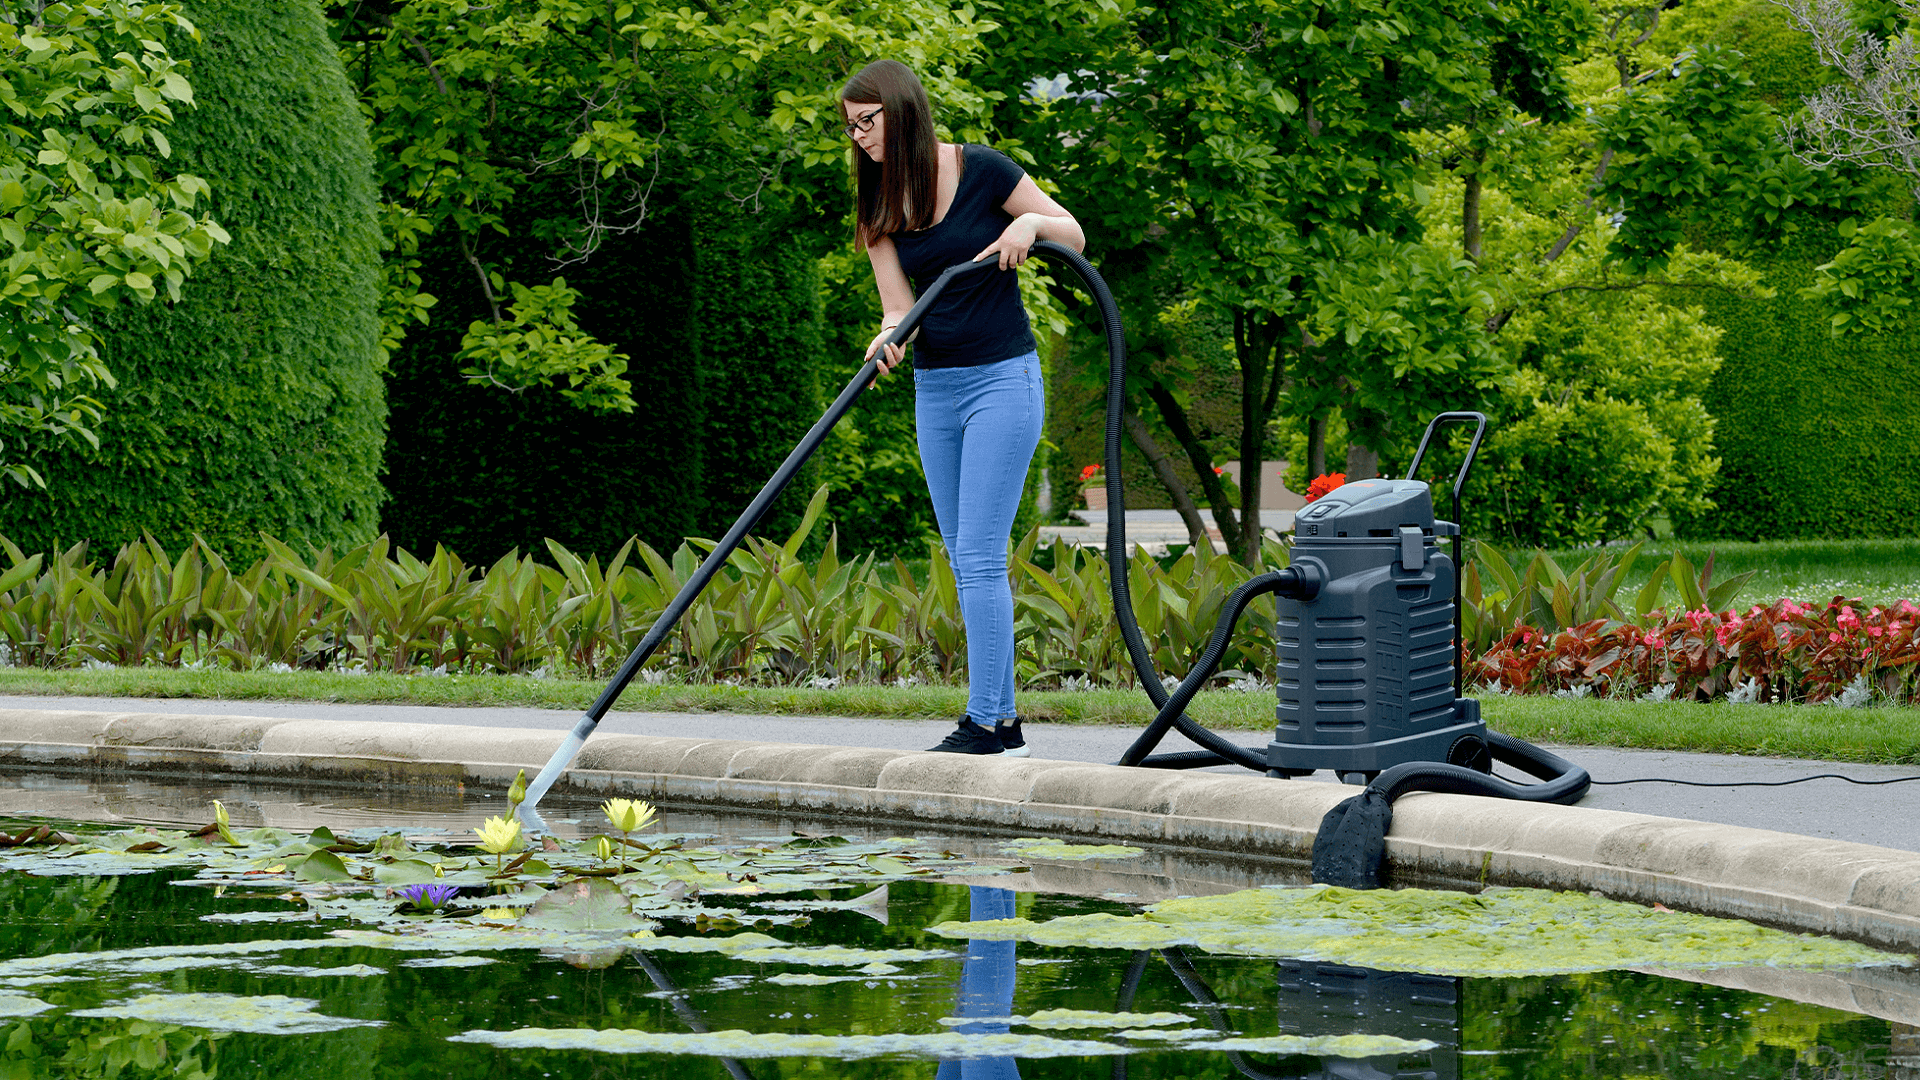 The Best Pond Vacuums - Reviews & 2022 Buying Guide